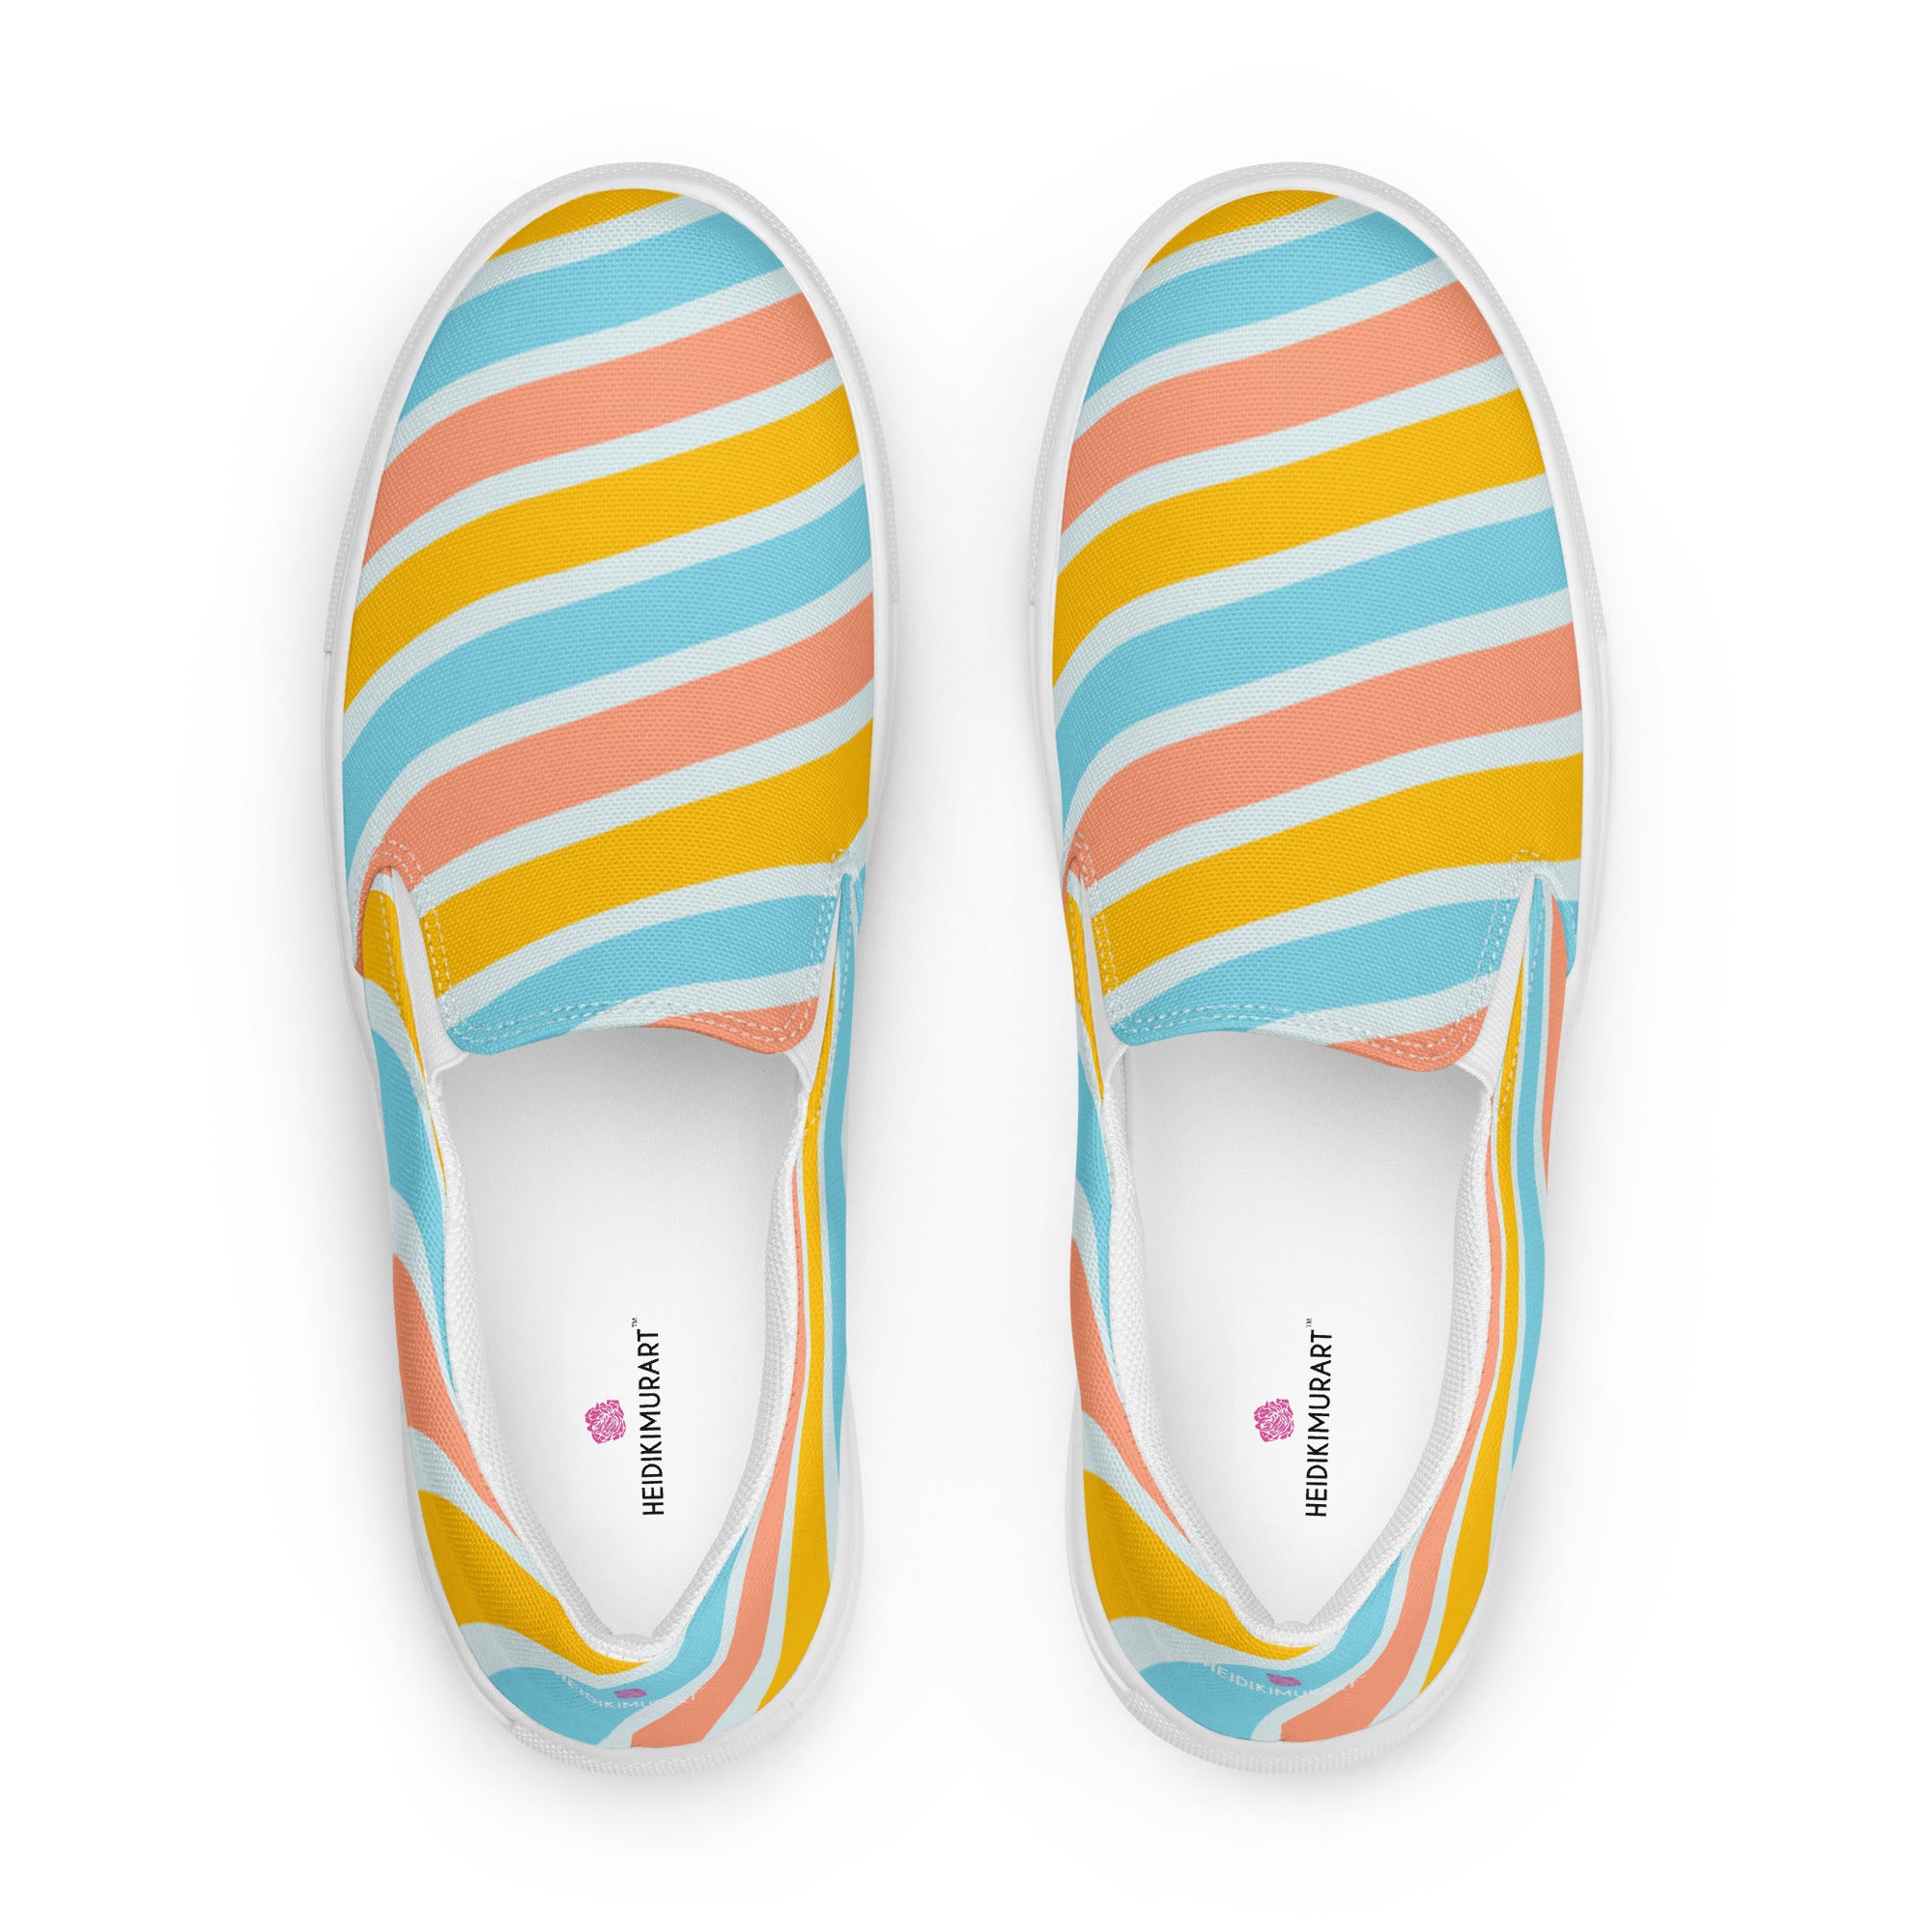 Rainbow Swirl Women's Sneakers, Gay Pride Rainbow Stripe Print Women’s Slip-On Canvas Shoes (US Size: 5-12) Women’s Premium High Quality Luxury Style Slip-On Canvas Shoes (US Size: 5-12) Women's Gay Pride Colorful Slip On Shoes, Slip-On Padded Breathable Loafer Shoes Footwear